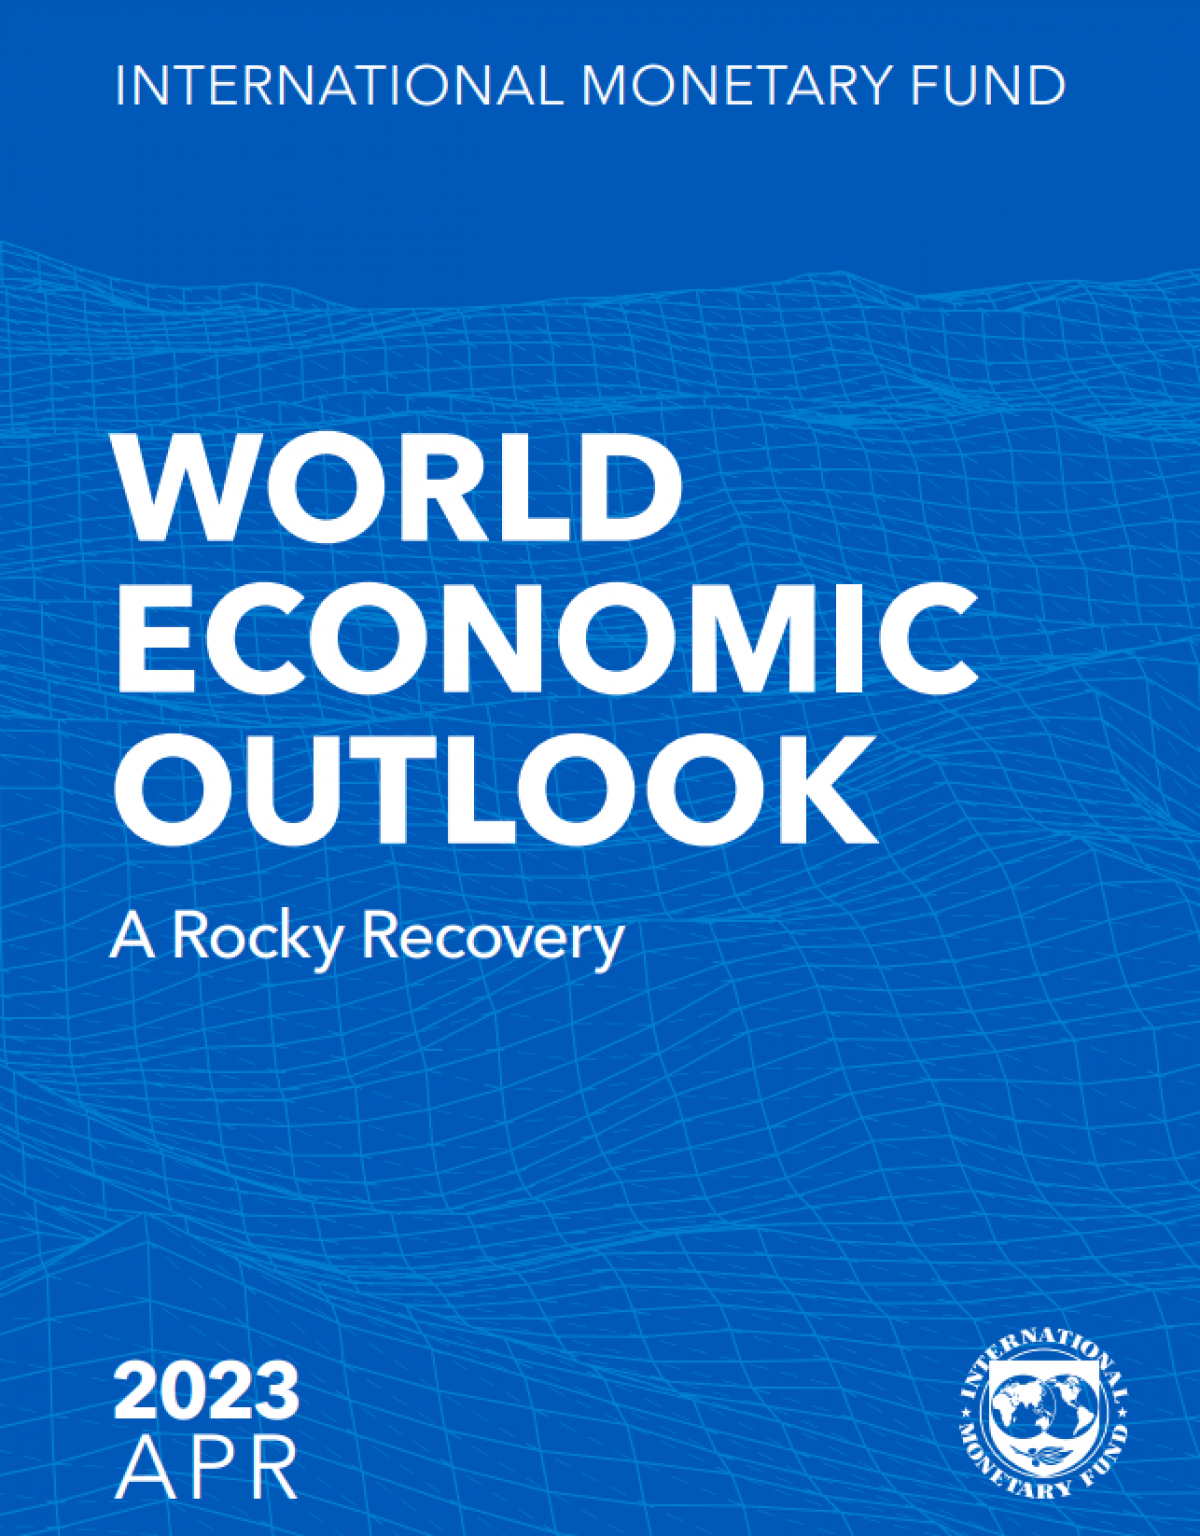 According to the report of the International Monetary Fund, global economic growth will weaken